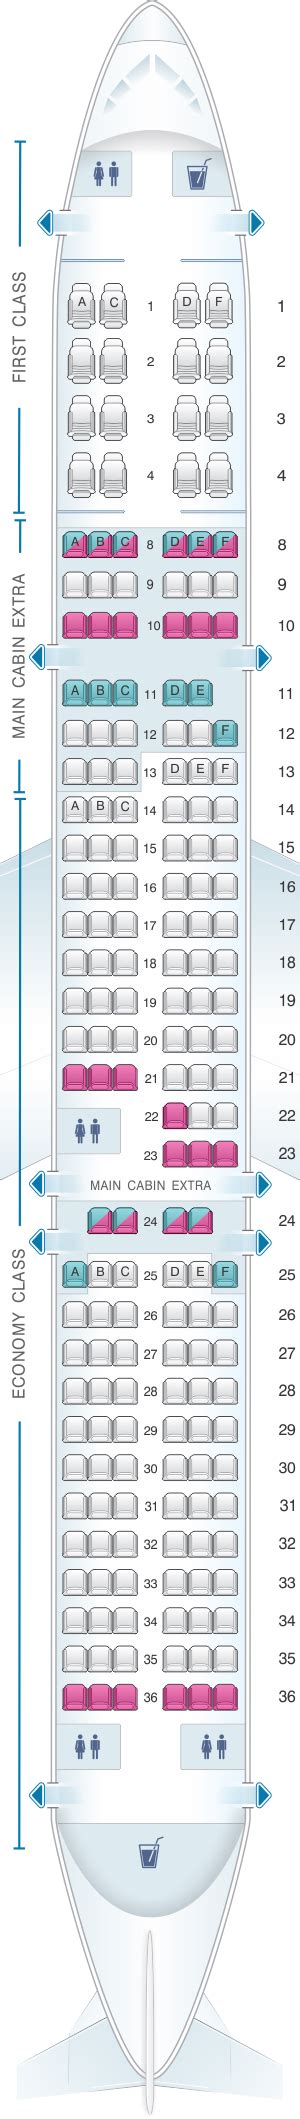 Seat Maps; American Airlines Airbus A321 Seat Map; Seat 32b; American Airlines Reviews. Seating Charts · Airbus A319 · Airbus A319 (MCE) · Airbus A320 Airbus A321 · Airbus A321 (transcon) · Airbus A321 (US Airways) · Airbus A330-200 · Airbus A330-300 · Boeing 737 MAX 8 · Boeing 737-800 · Boeing 737-800 (New MCE) · Boeing 757-200 .... 